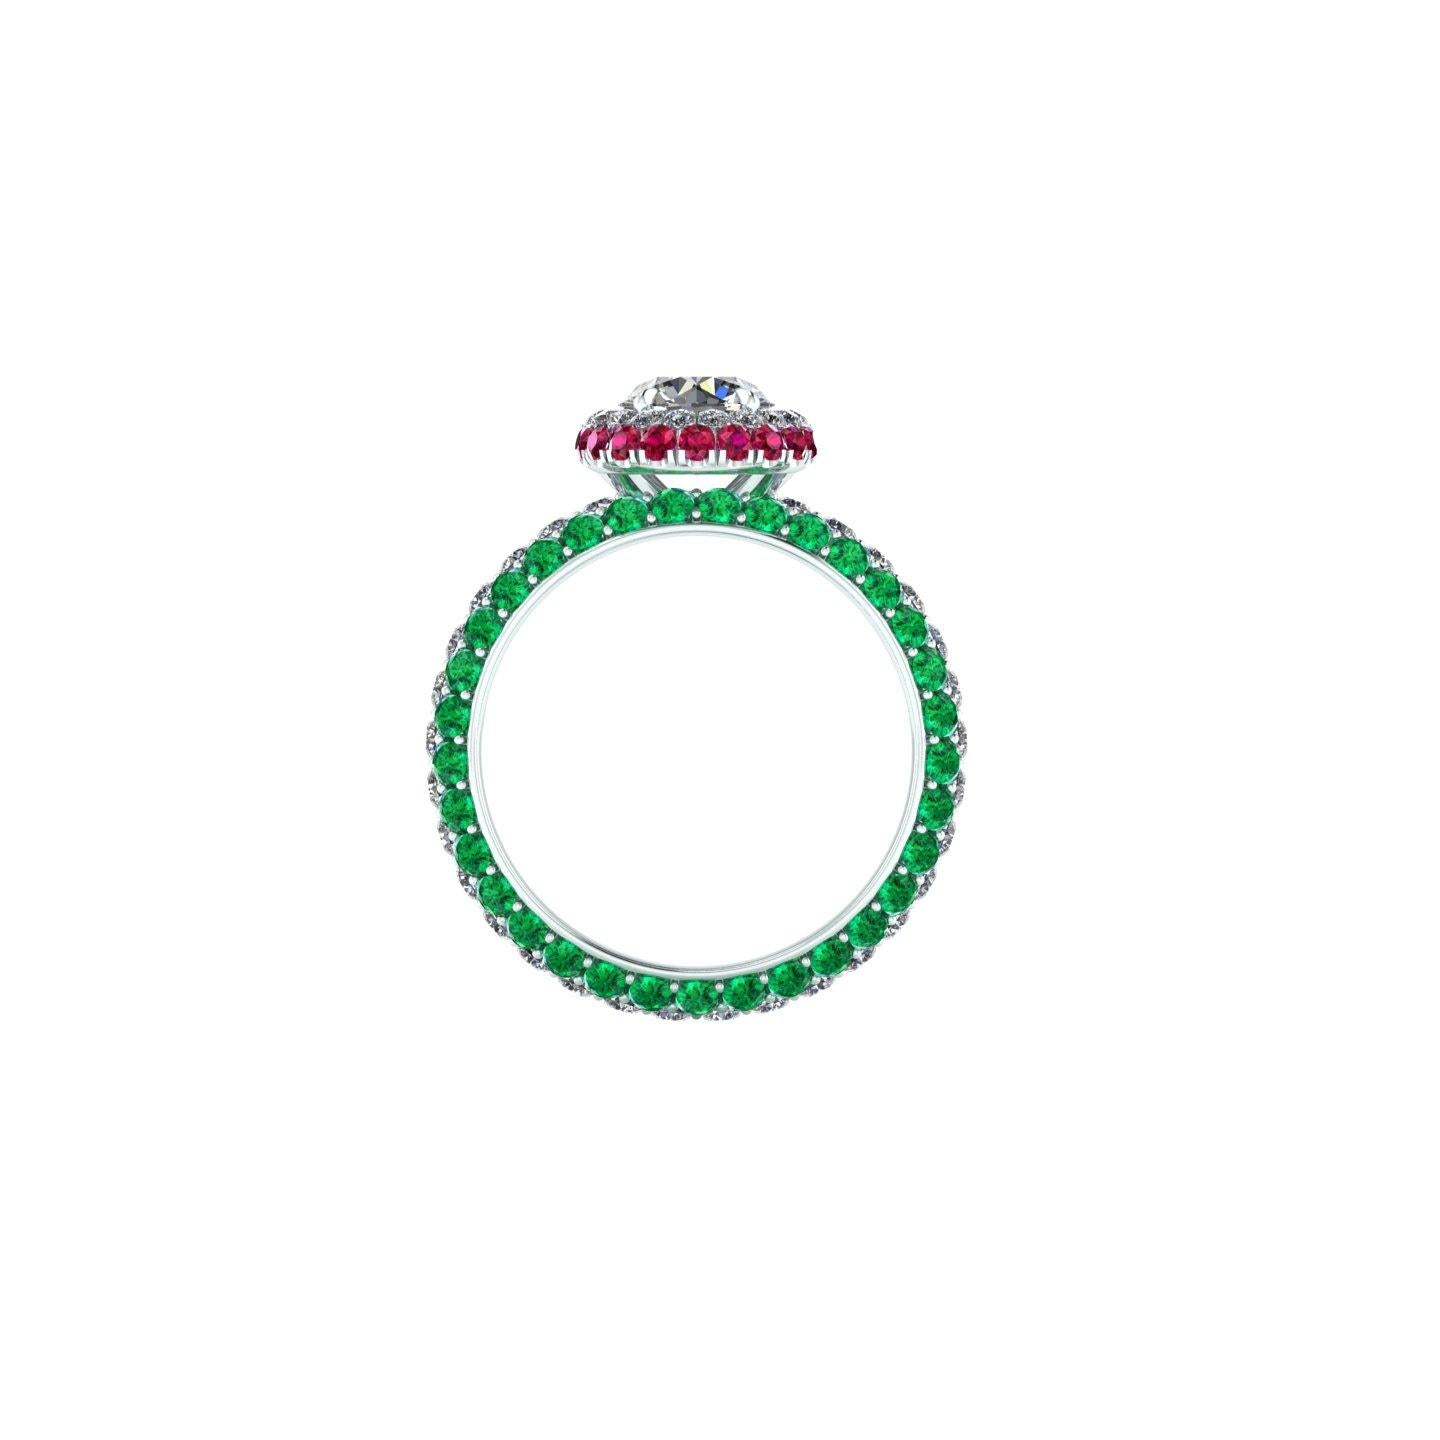 Italian Flag Lover 
GIA Certified 1.06 Round diamond, G color, IF clarity, Internally Flawless with Triple Excellent Specs. a stunning classic, incredibly beautiful diamond set in a hand made Double Round Emeralds and Rubies Halo and a triple pave'